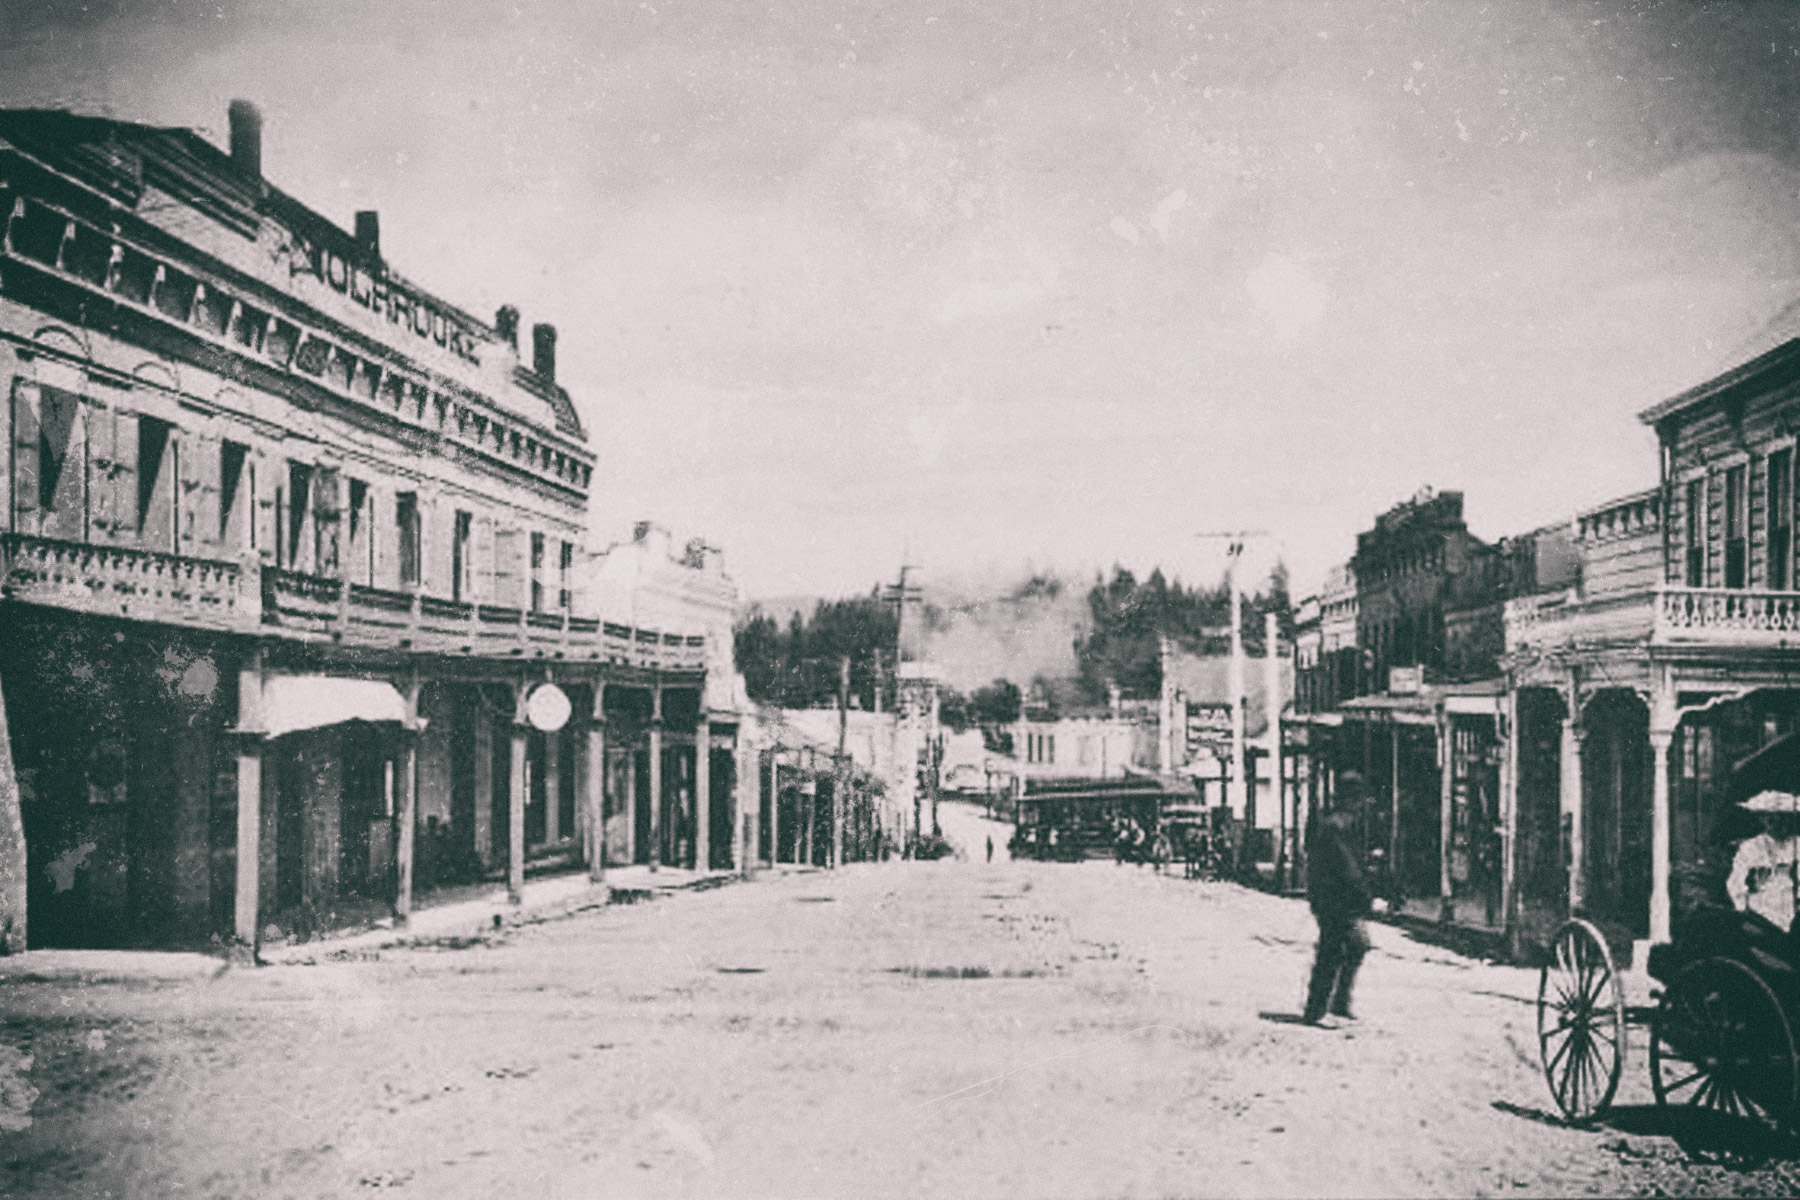 View of Holbrooke Hotel in the 1800s